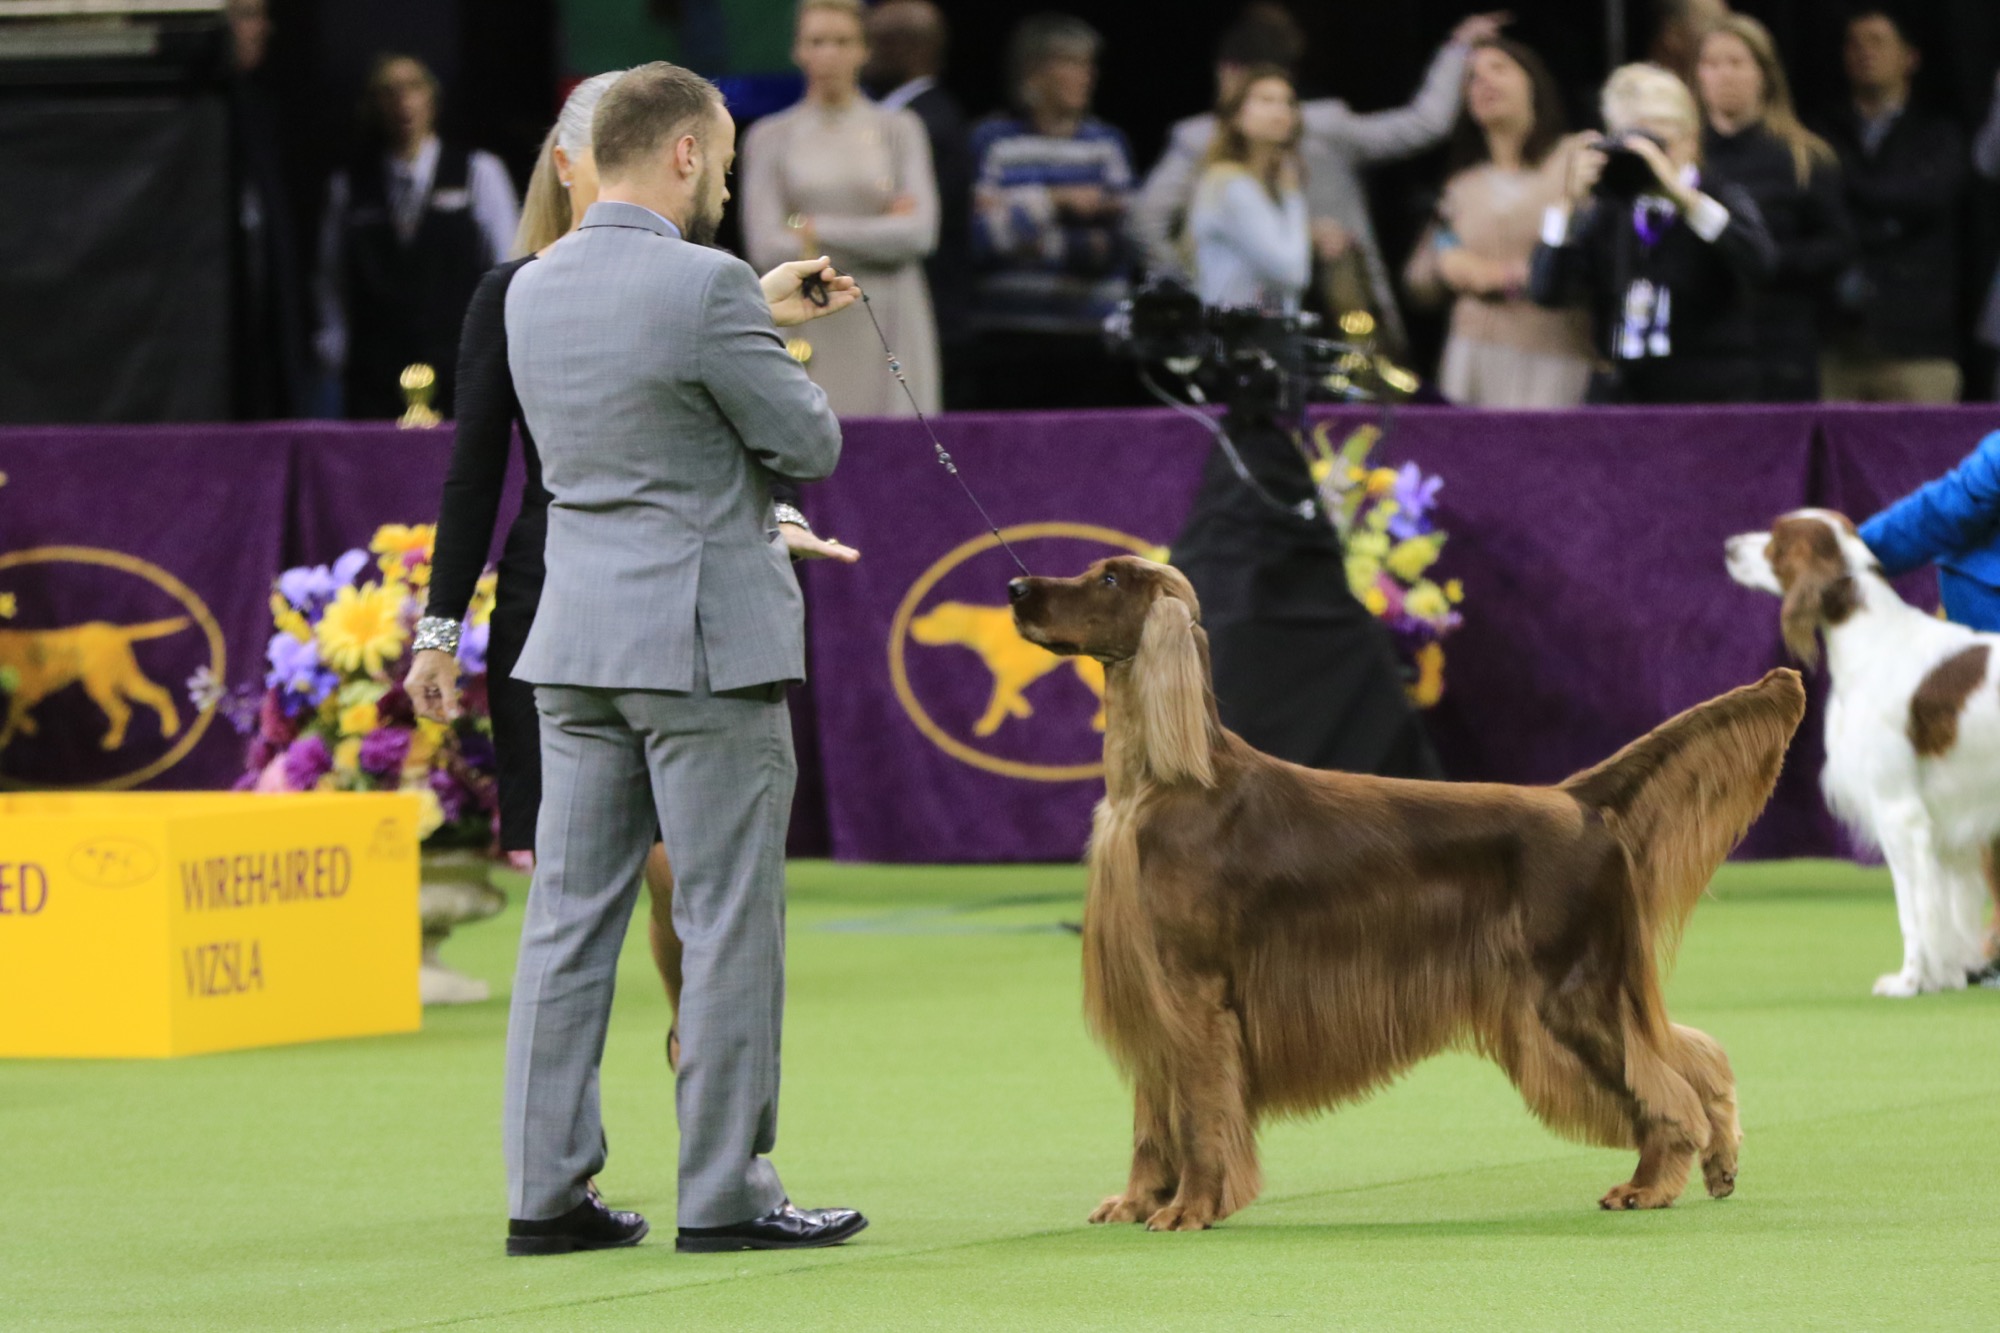 Ocean City Resident Wins Sporting Group at 141st Annual Westminster Kennel Club Dog Show